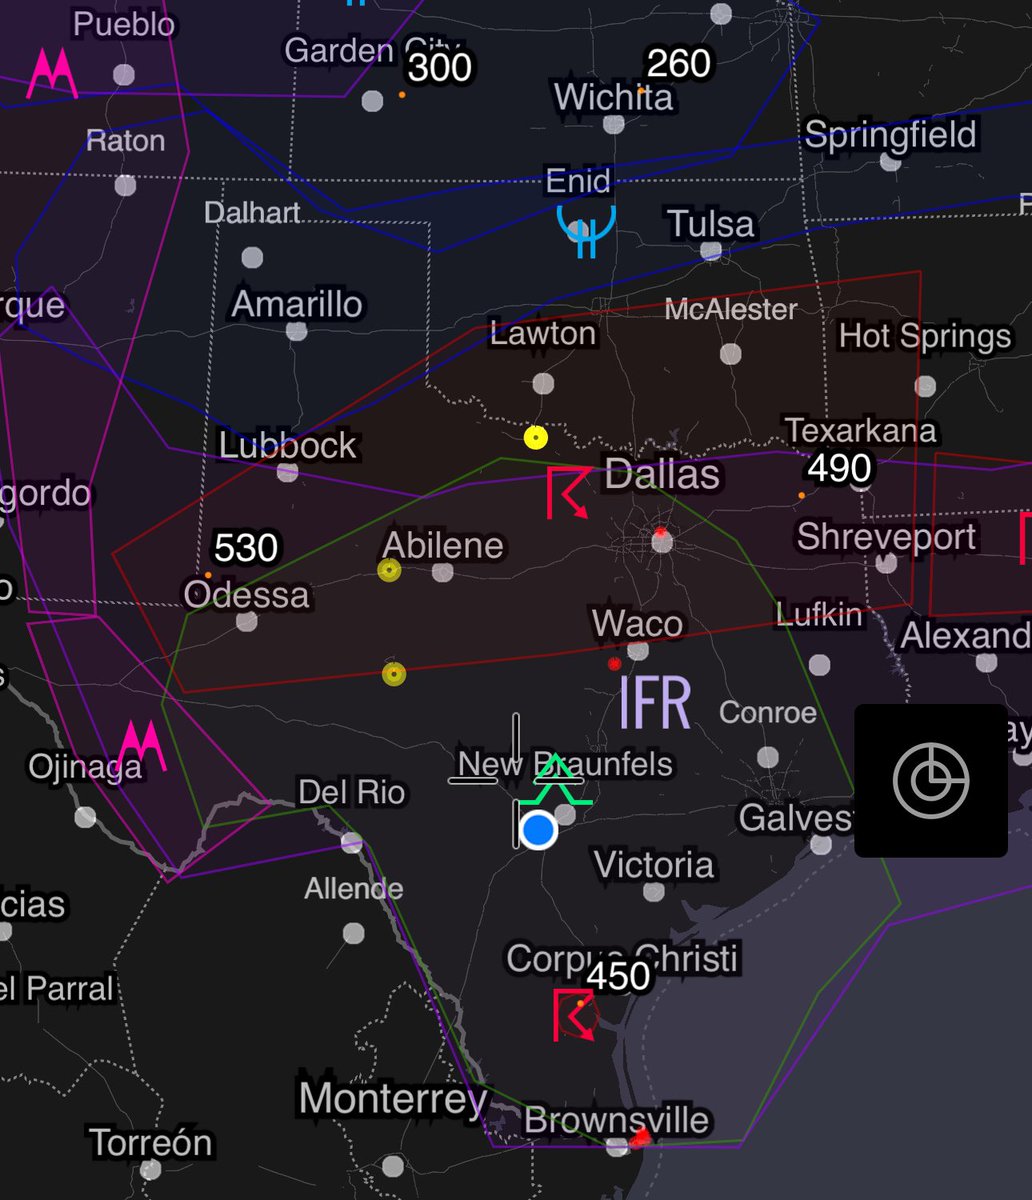 All that rain and lightning over DFW means that most American flights are cancelled. The ground stop through 9:15 a.m. will likely be extended or reissued. Average delays are 91 minutes. Guess who has to spend another night at the haunted hotel? 🙃 Me. Trying again tomorrow.